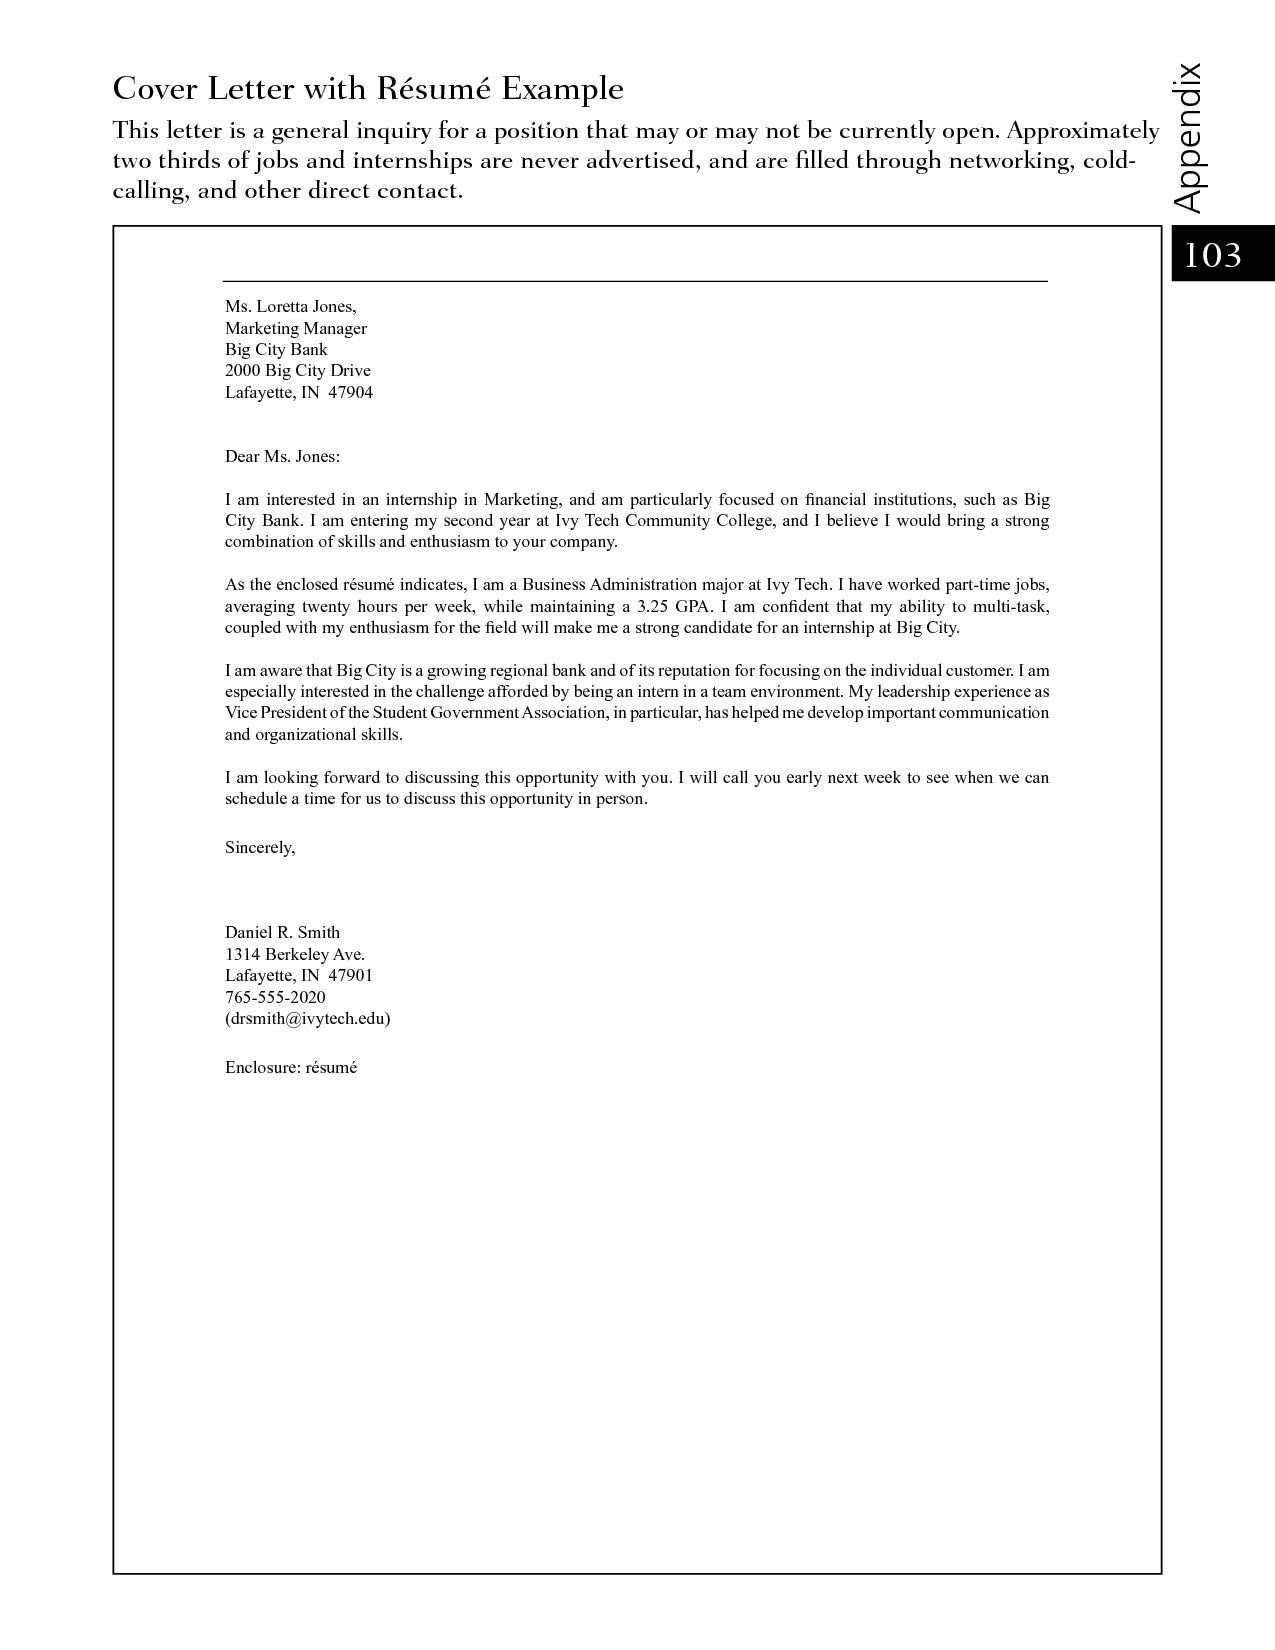 short general cover letter examples